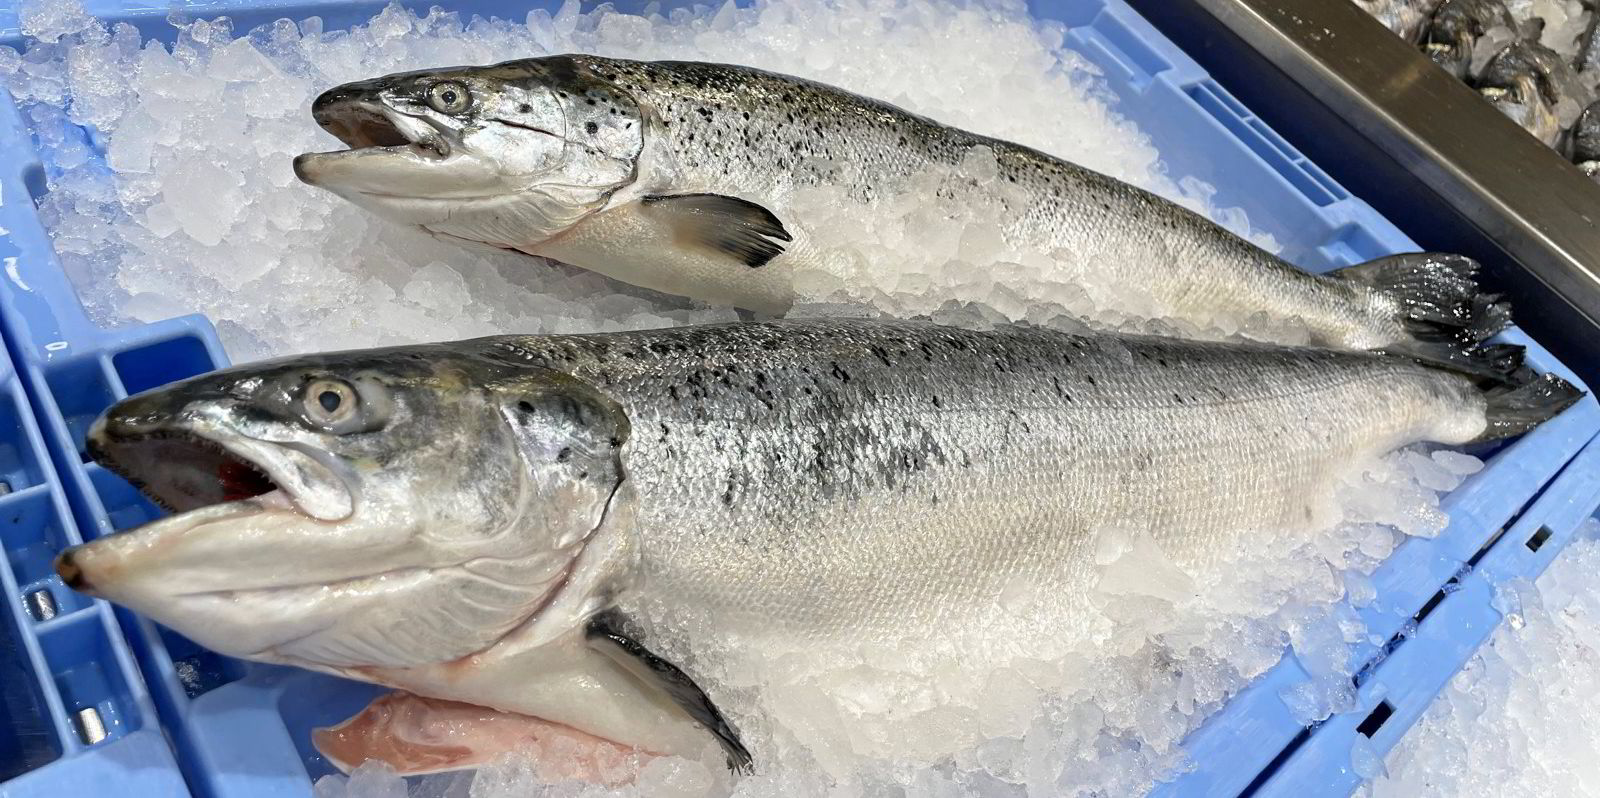 It's gotten ugly': Norway salmon prices down trending downward, erasing  recent gains